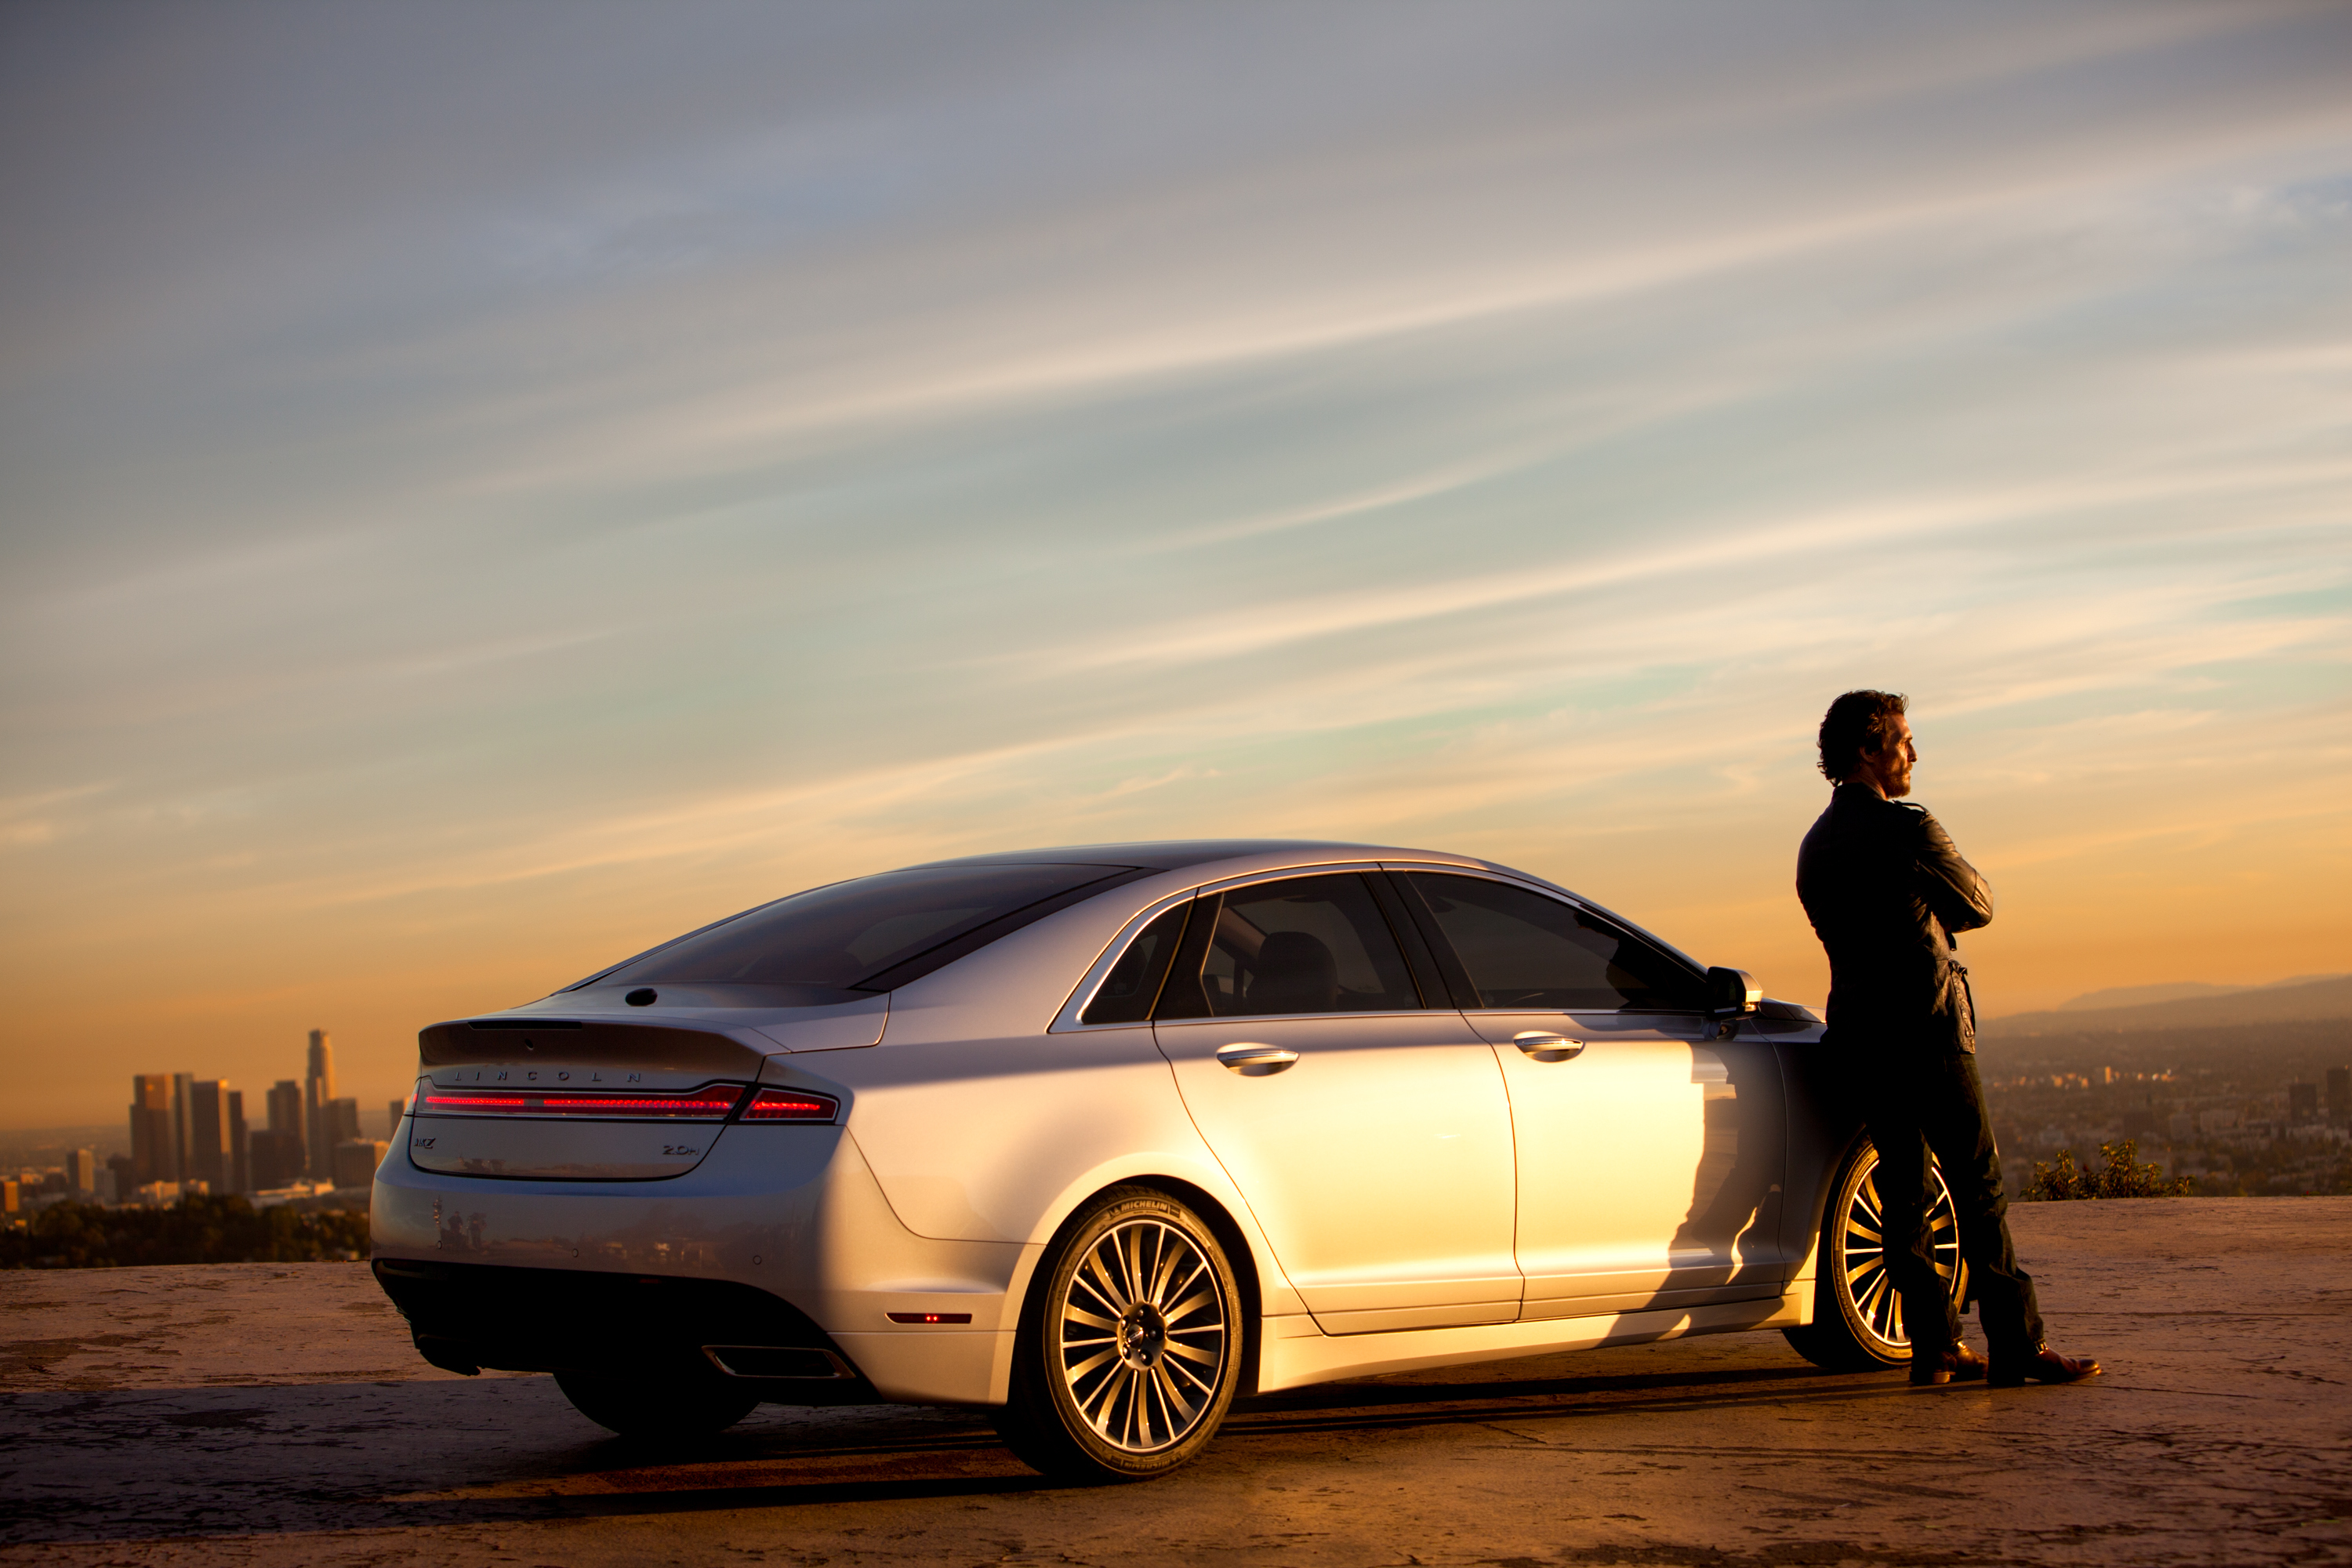 Matthew McConaughey Gets Behind Wheel of 2015 Lincoln MKZ in New Ads Airing  Jan. 1 | Business Wire